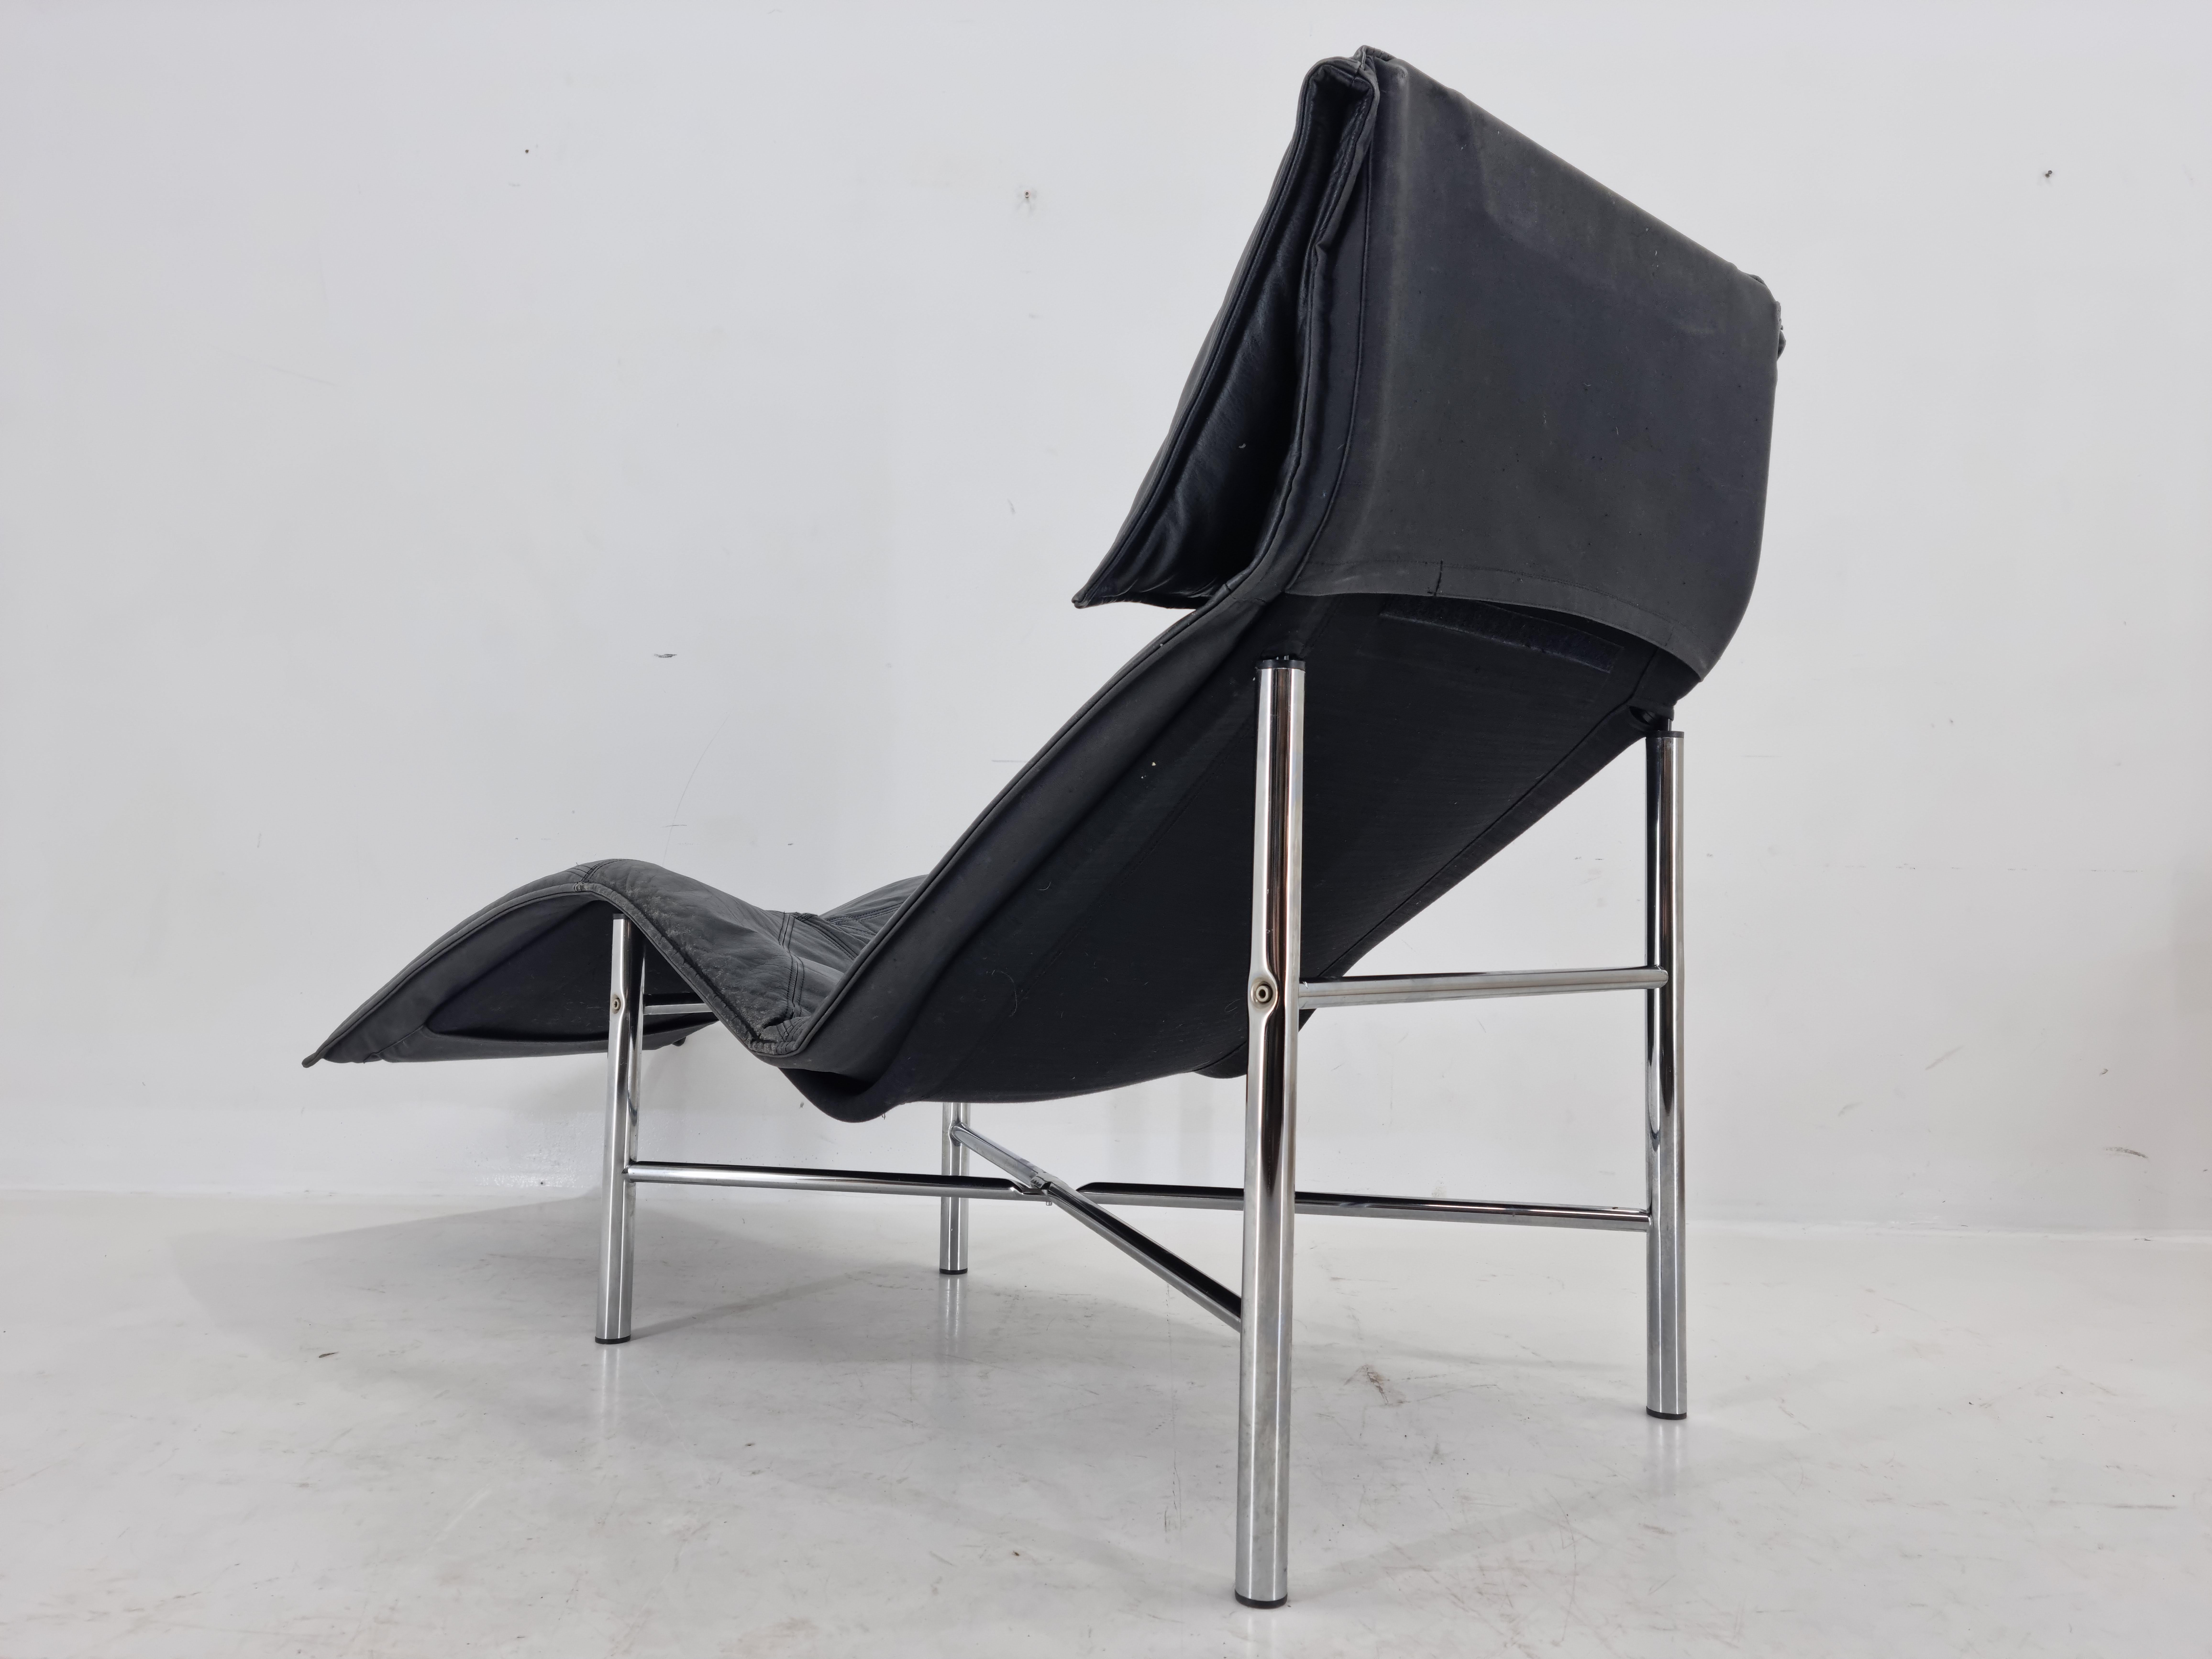 Midcentury Skye Chaise Lounge Chair for IKEA by Tord Björklund, Sweden, 1970s For Sale 4